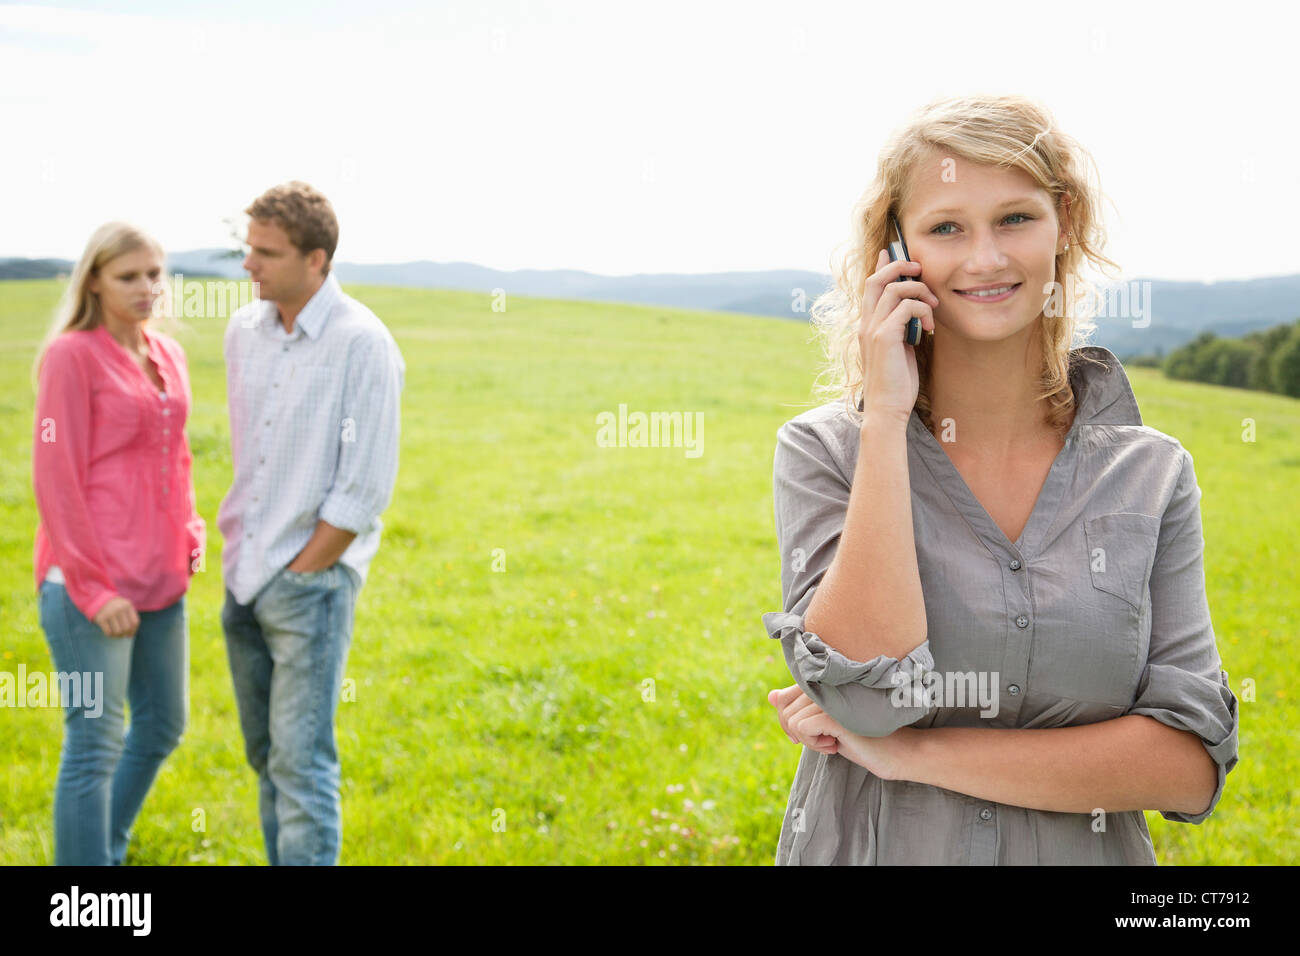 Young Woman talking on mobile phone on meadow Banque D'Images